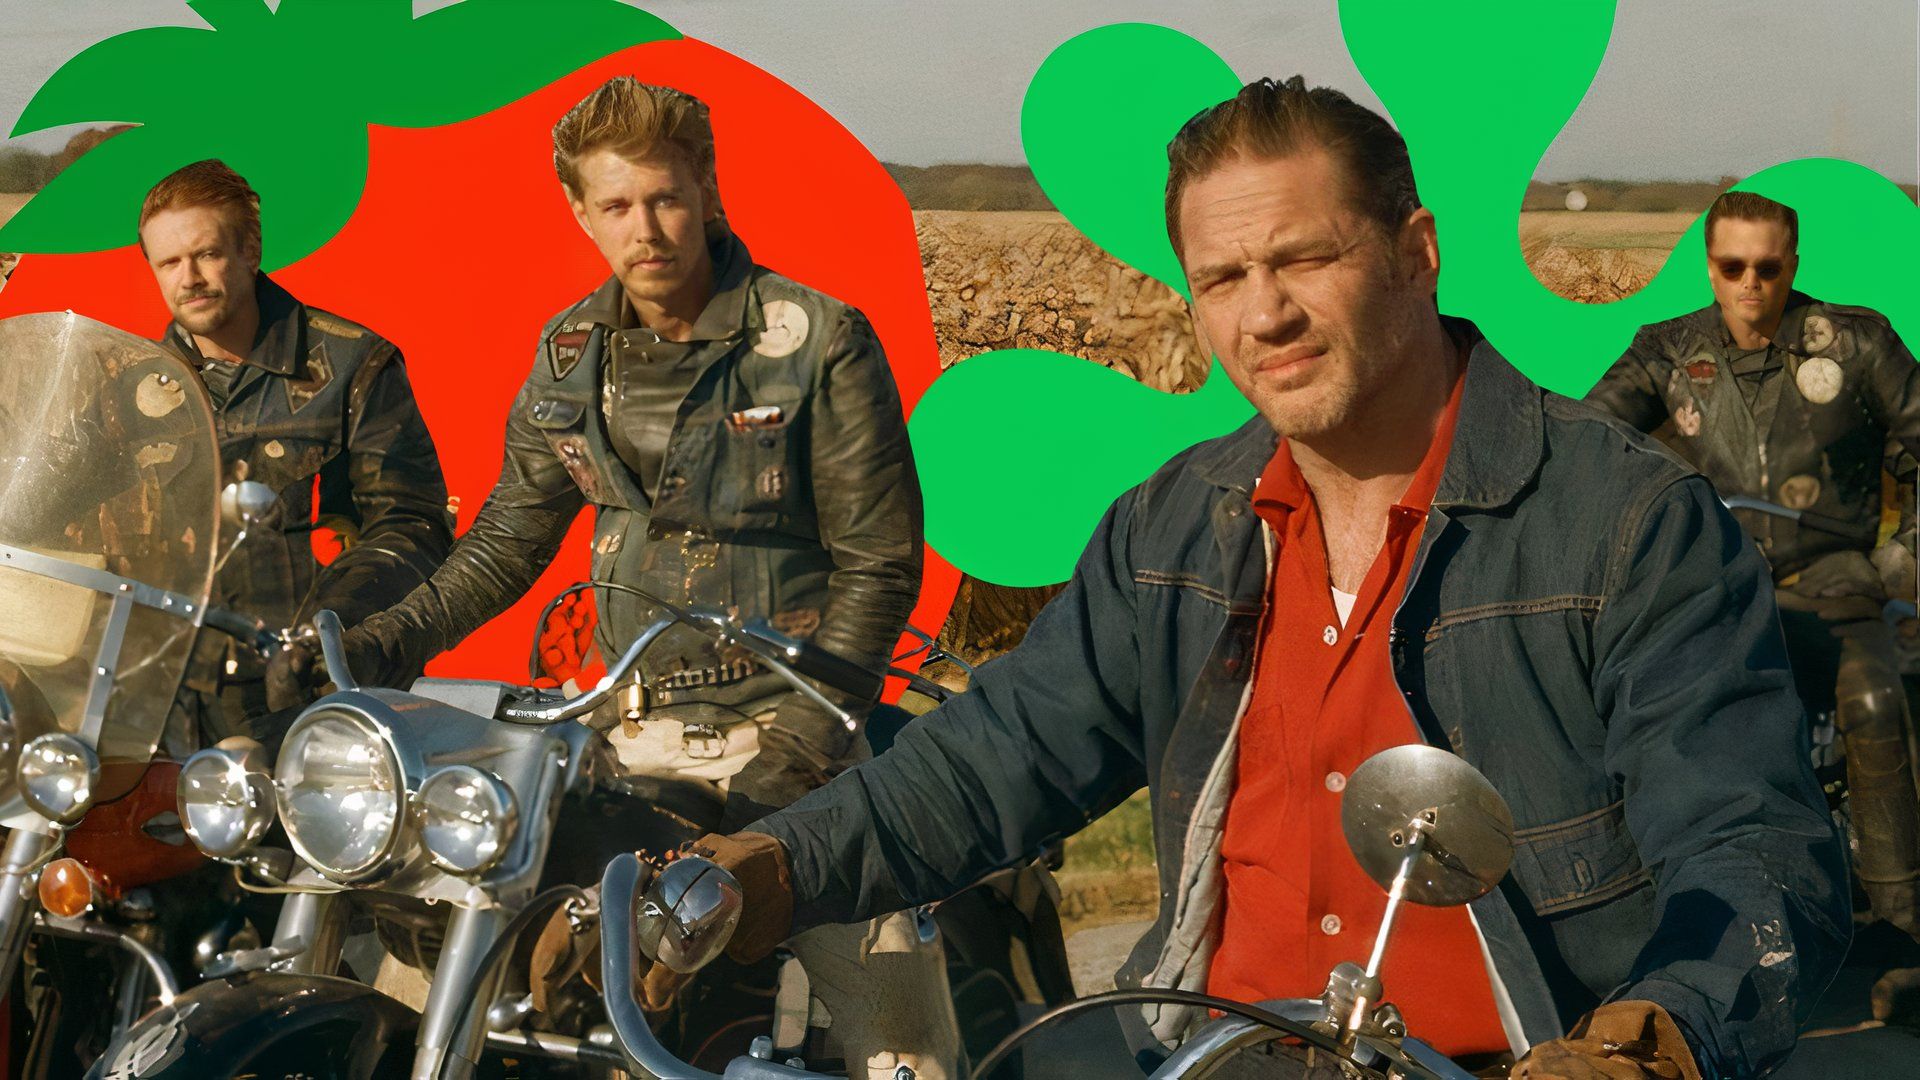 The Bikeriders Rotten Tomatoes Score Revealed, Tom Hardy Movie Lands in ...